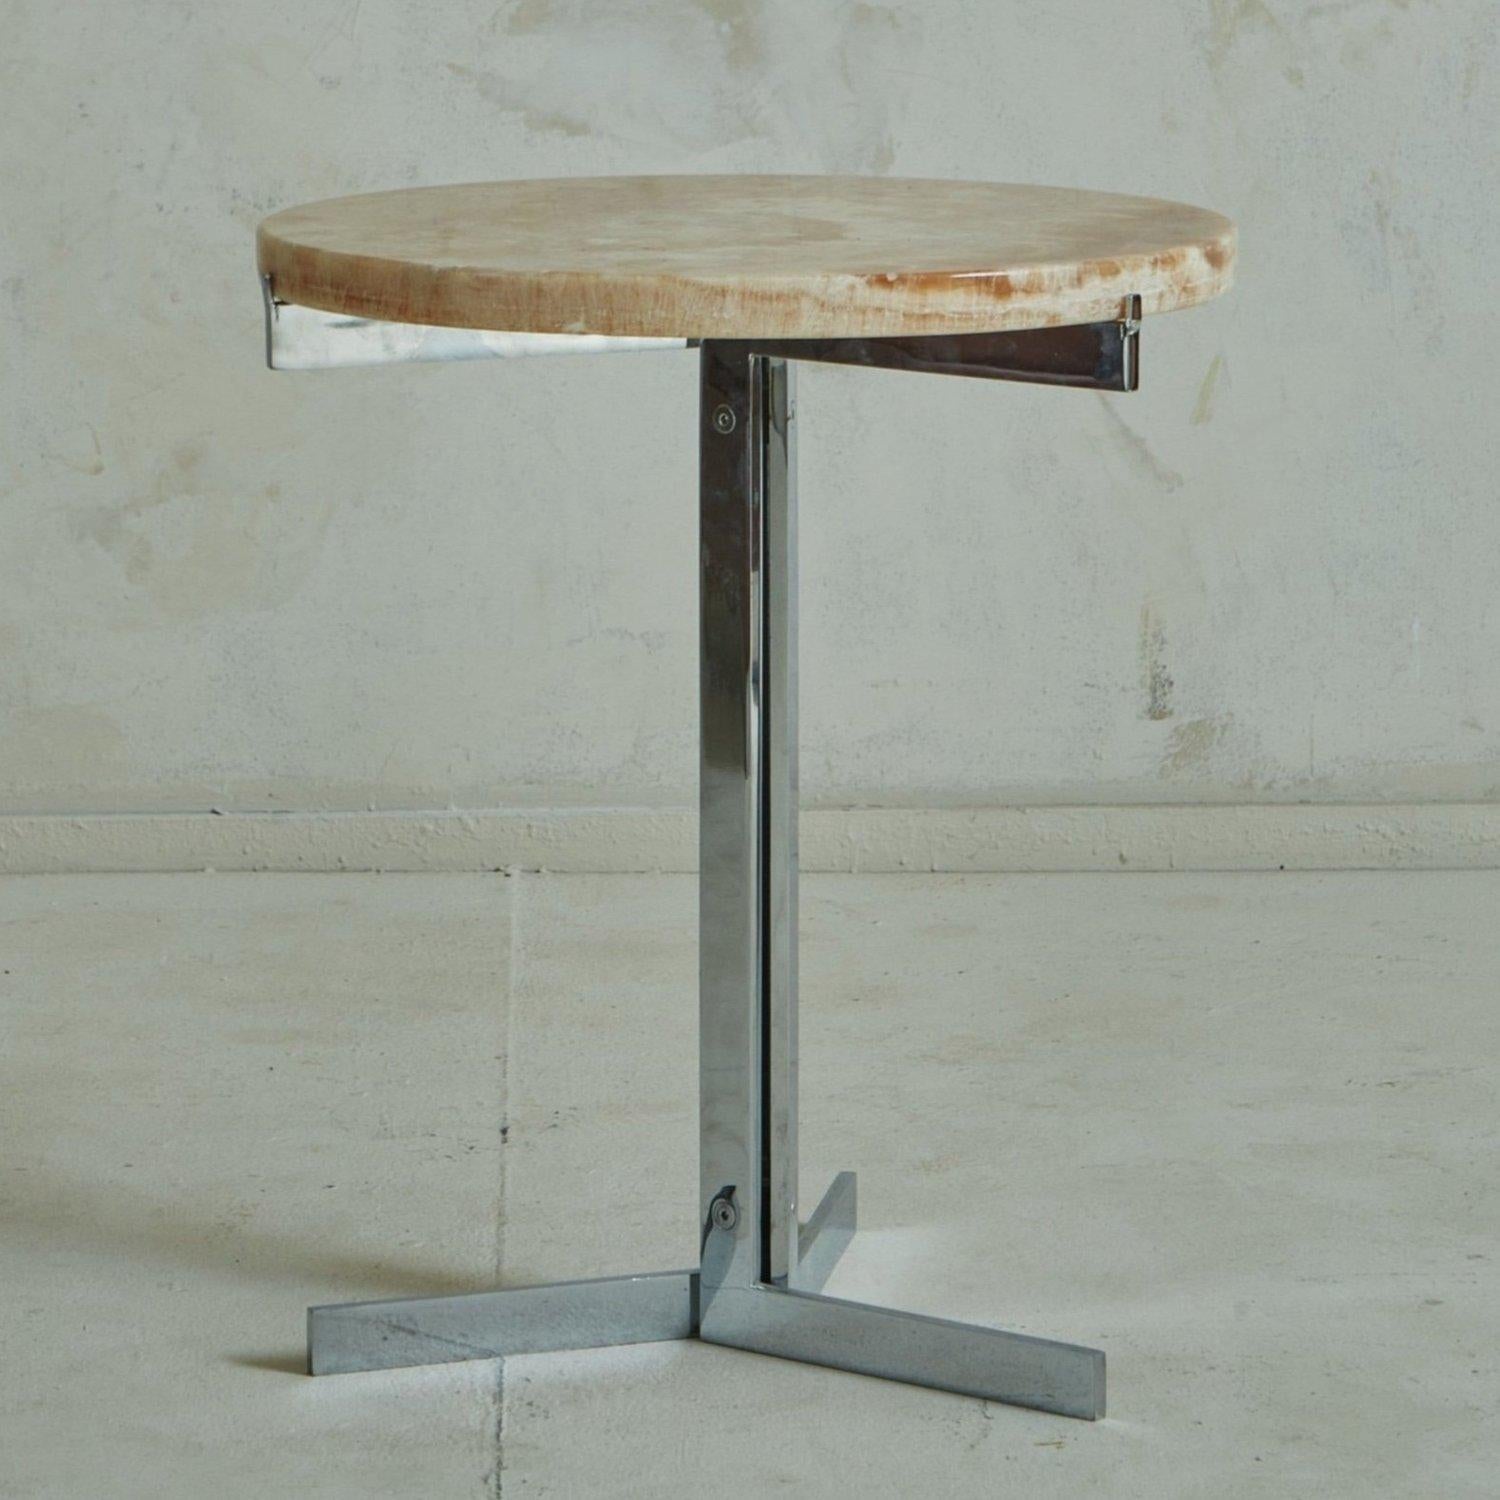 A 1970s Swiss ‘Alpha’ side table by Hans Eichenberger for Stendig. This table has a polished chromed steel tripod pedestal base. It features a round onyx table top with stunning veining in a range of salmon and cream hues. Unmarked. Switzerland,